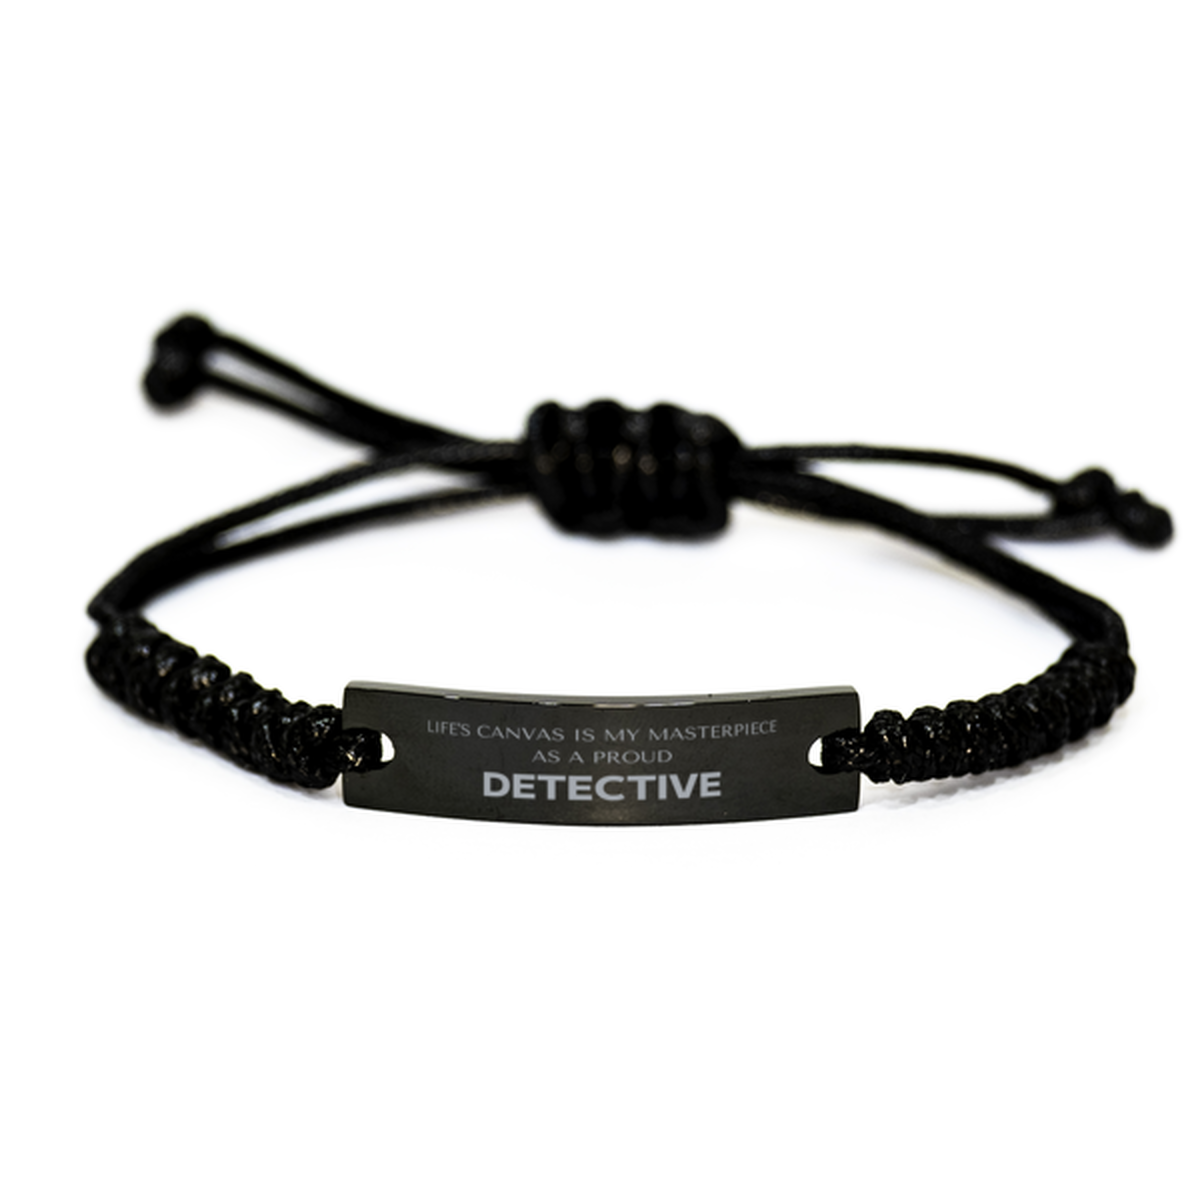 Proud Detective Gifts, Life's canvas is my masterpiece, Epic Birthday Christmas Unique Black Rope Bracelet For Detective, Coworkers, Men, Women, Friends